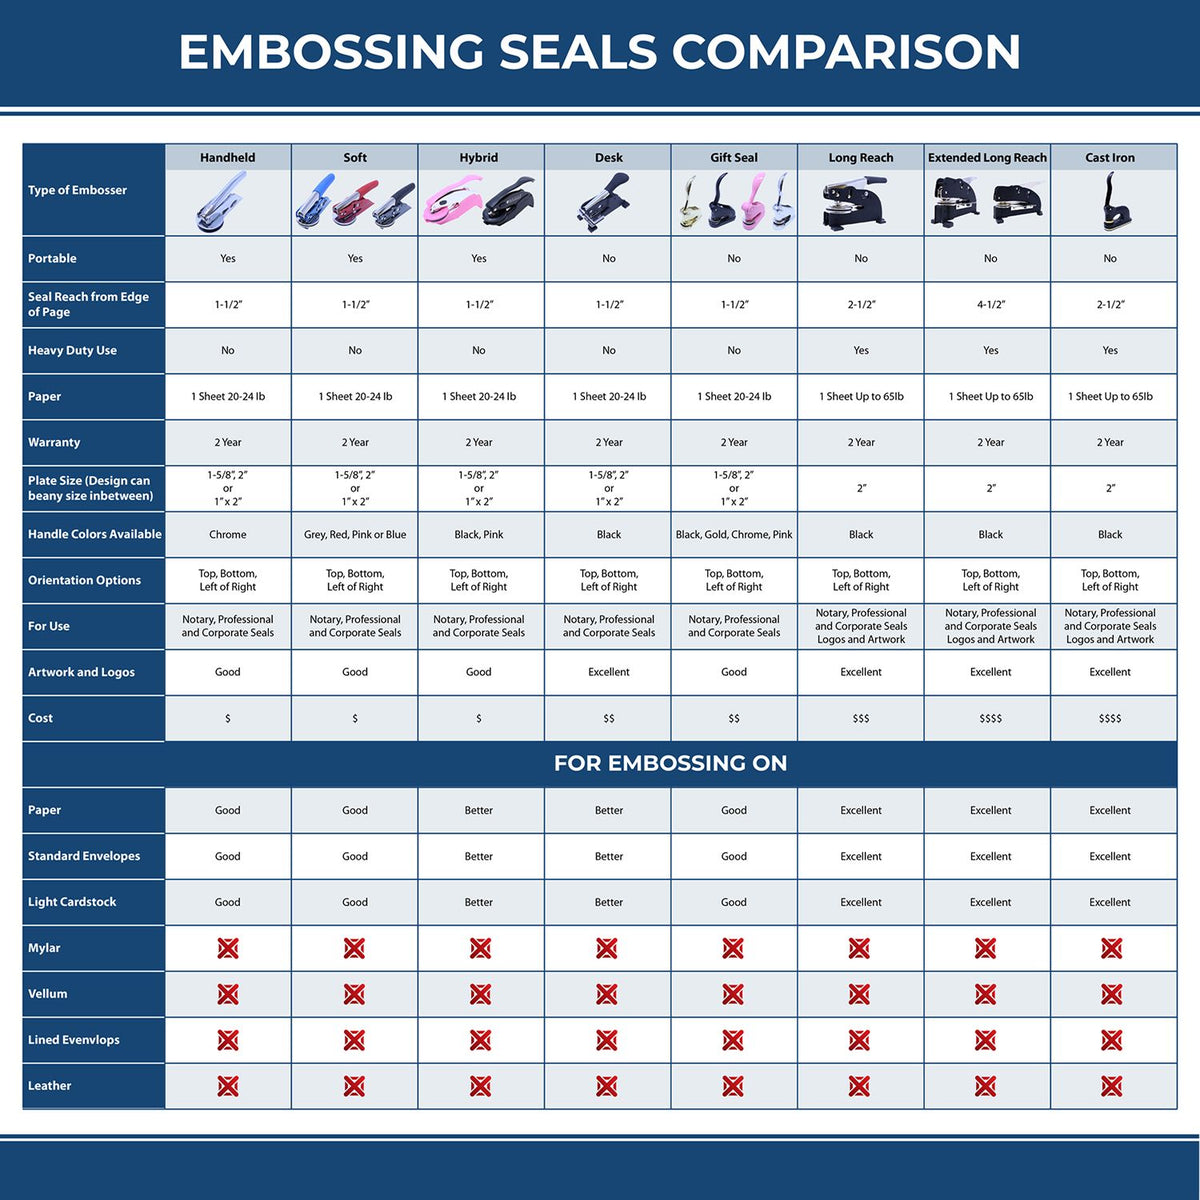 A comparison chart for the different types of mount models available for the Heavy Duty Cast Iron Missouri Geologist Seal Embosser